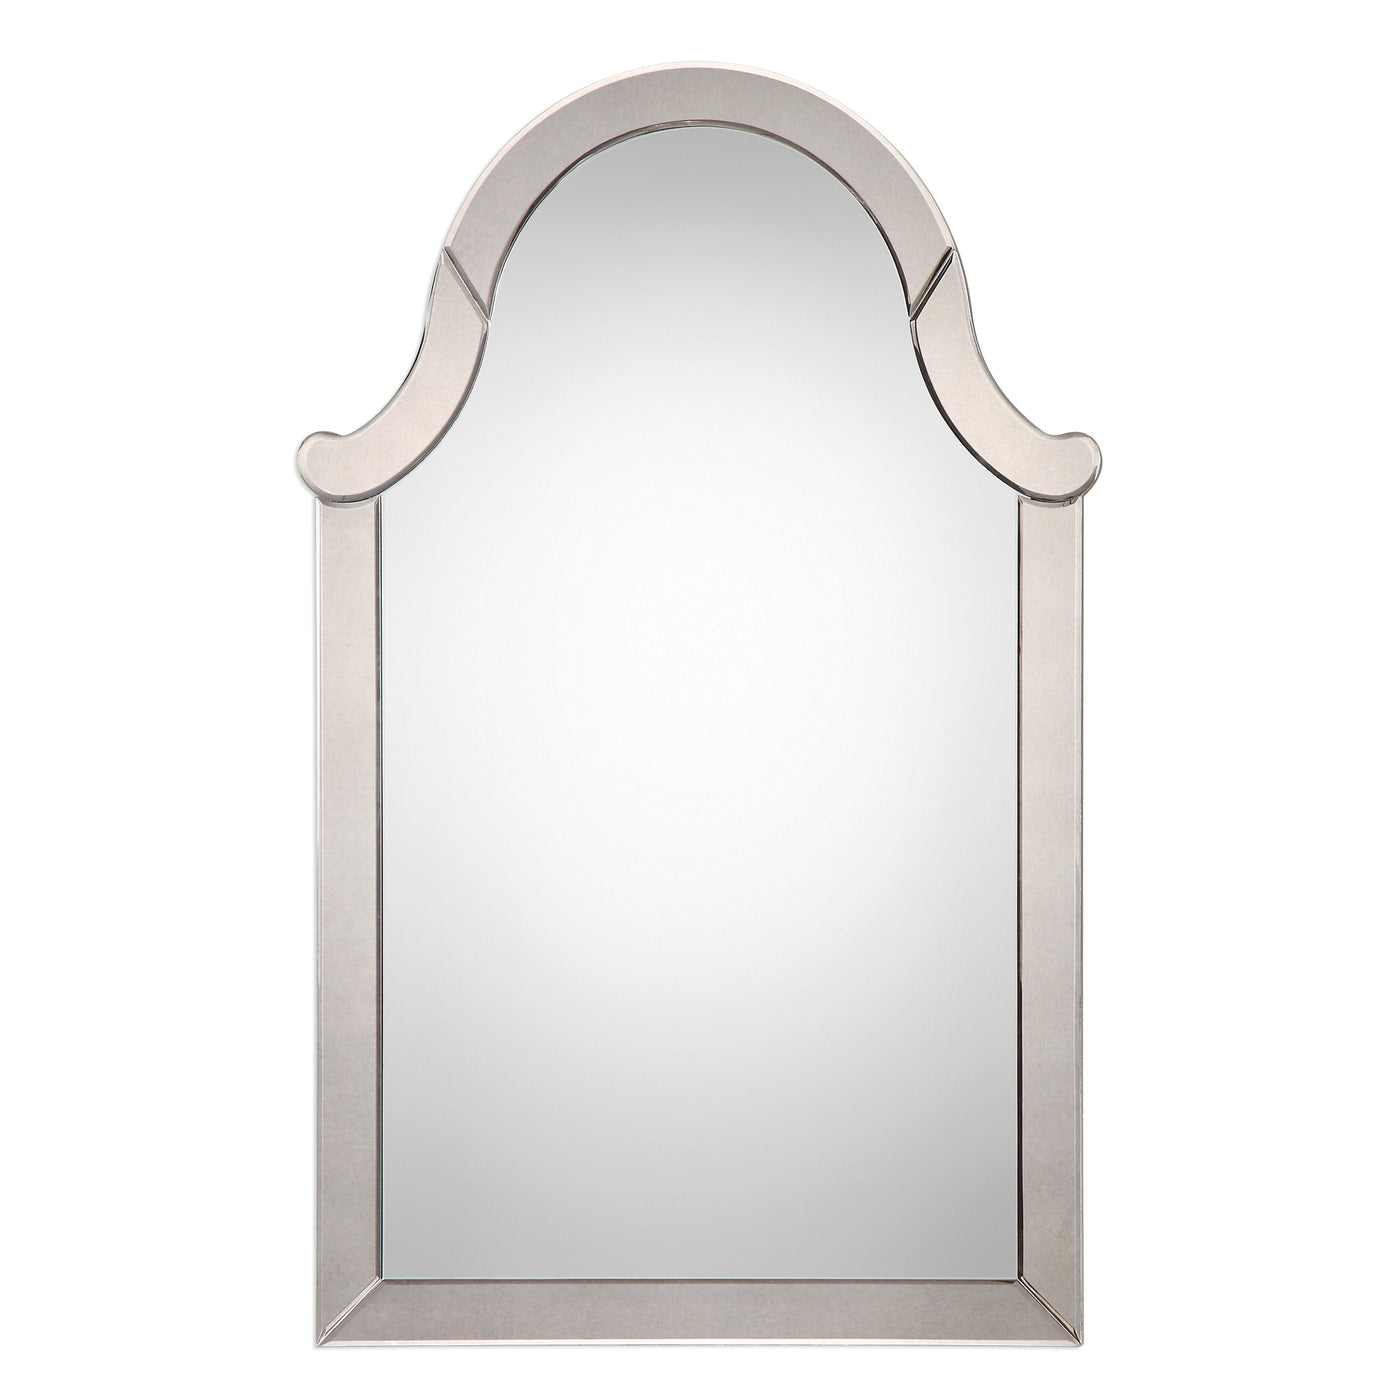 This Frameless Mirror Featuring Hand Beveled Side Mirrors, Displays An Impressive Arch Top.